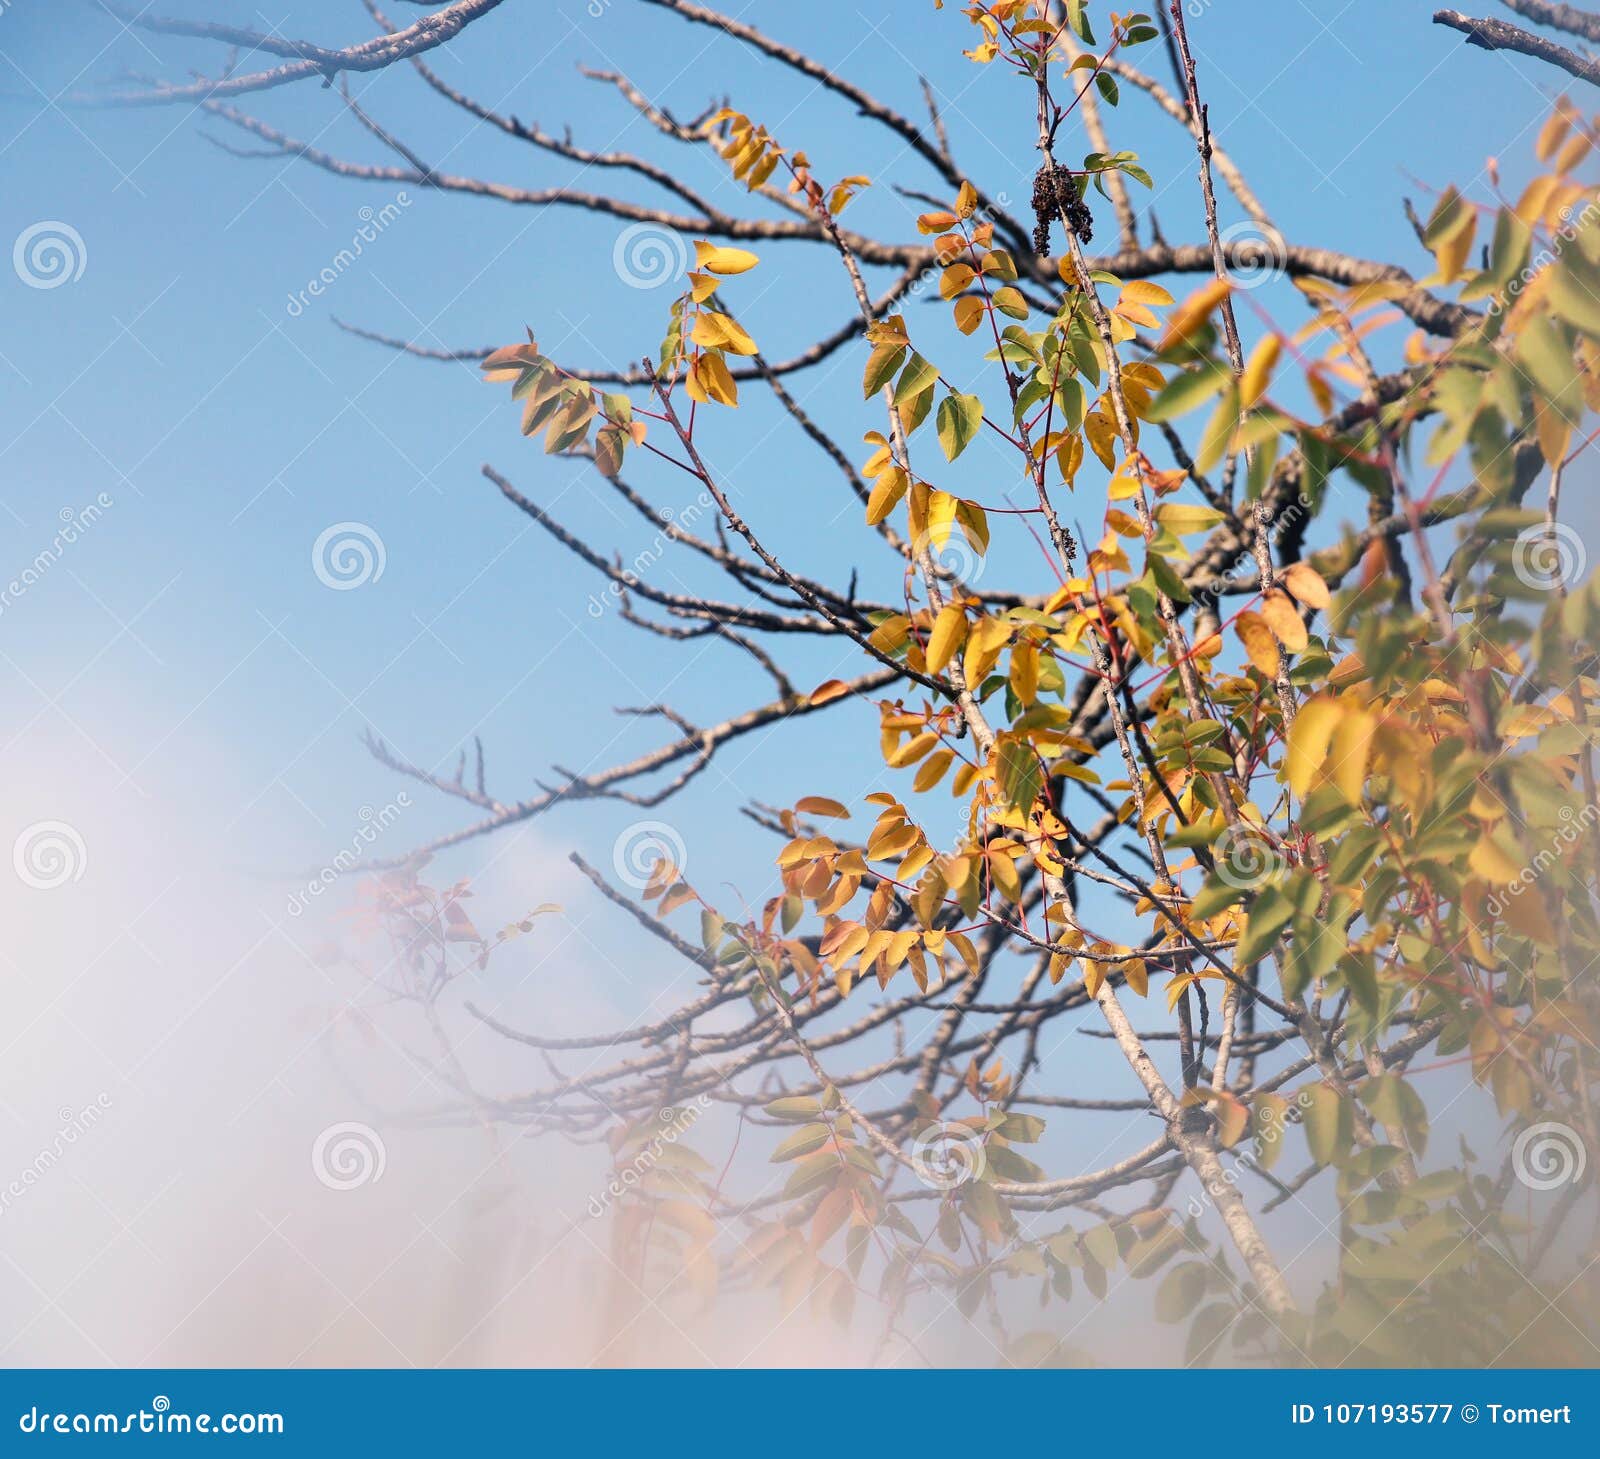 Abstract and Surreal Autumnal Dreamy Image of Bare Branches at the